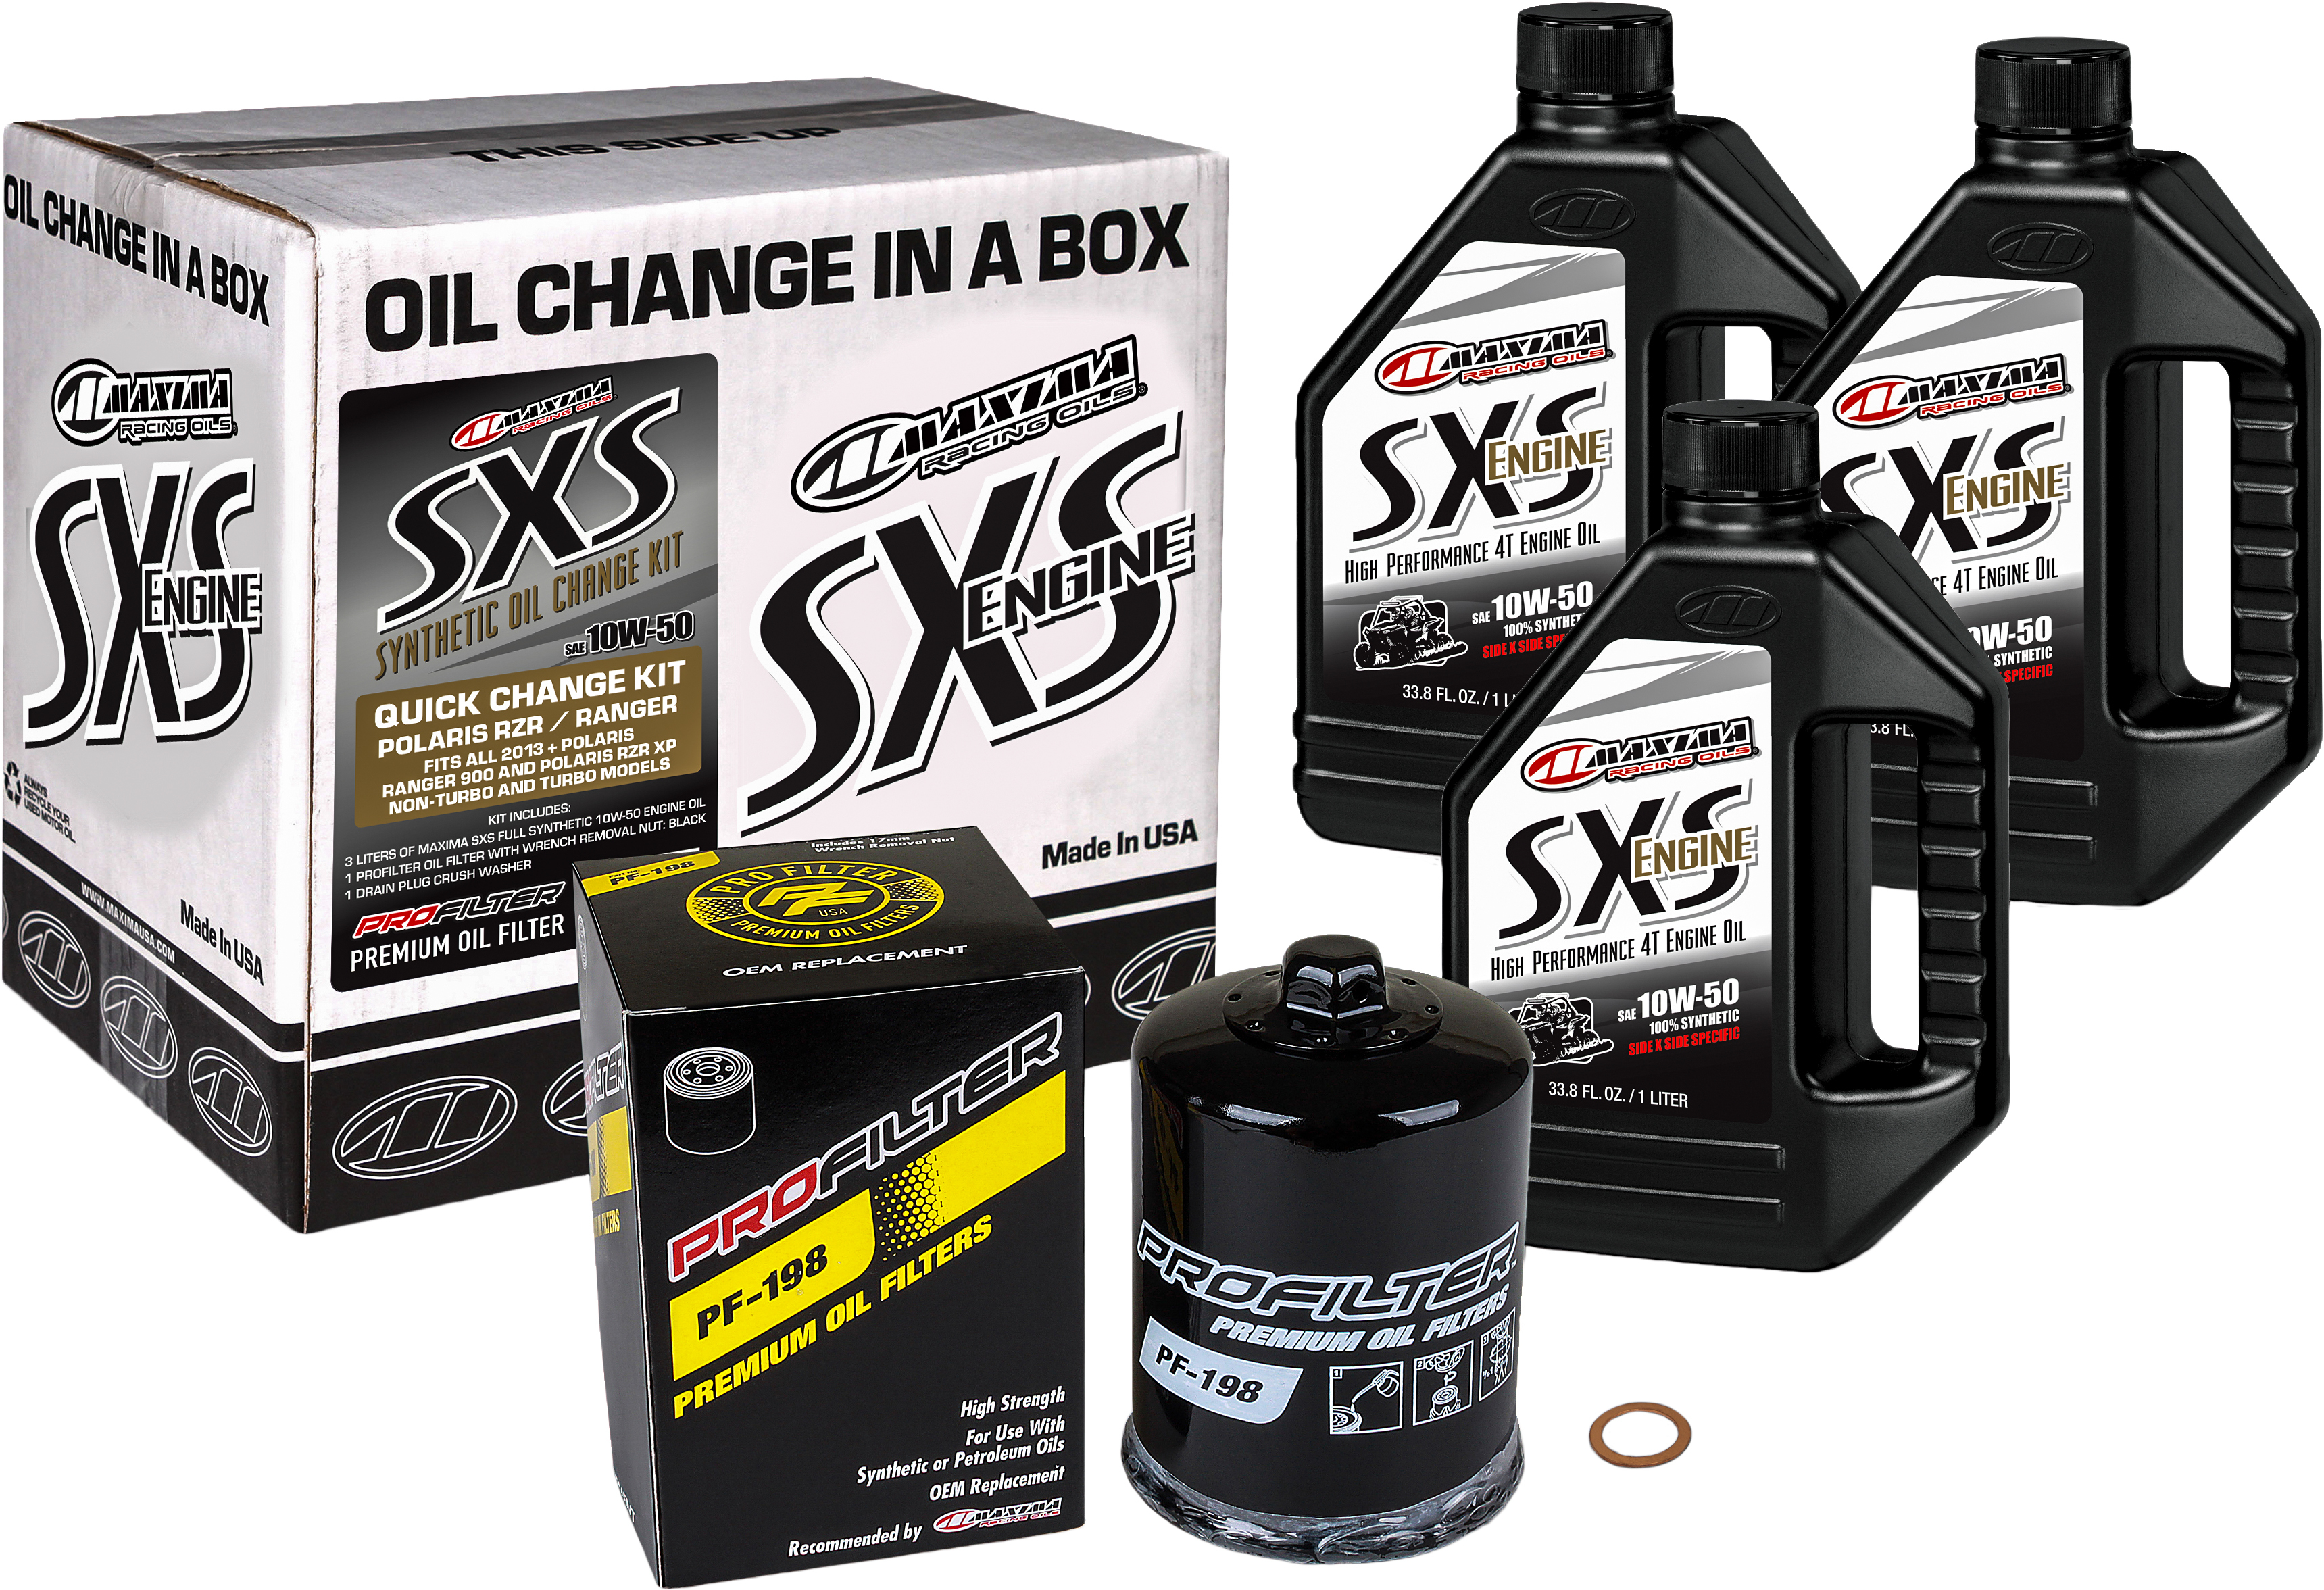 SXS Quick Oil Change Kit 10w-50 w/ Oil Filter For RZR & Ranger 900/1000 XP - 3 QTS Oil, PF-198 Filter, & Drain Plug Washer - Click Image to Close